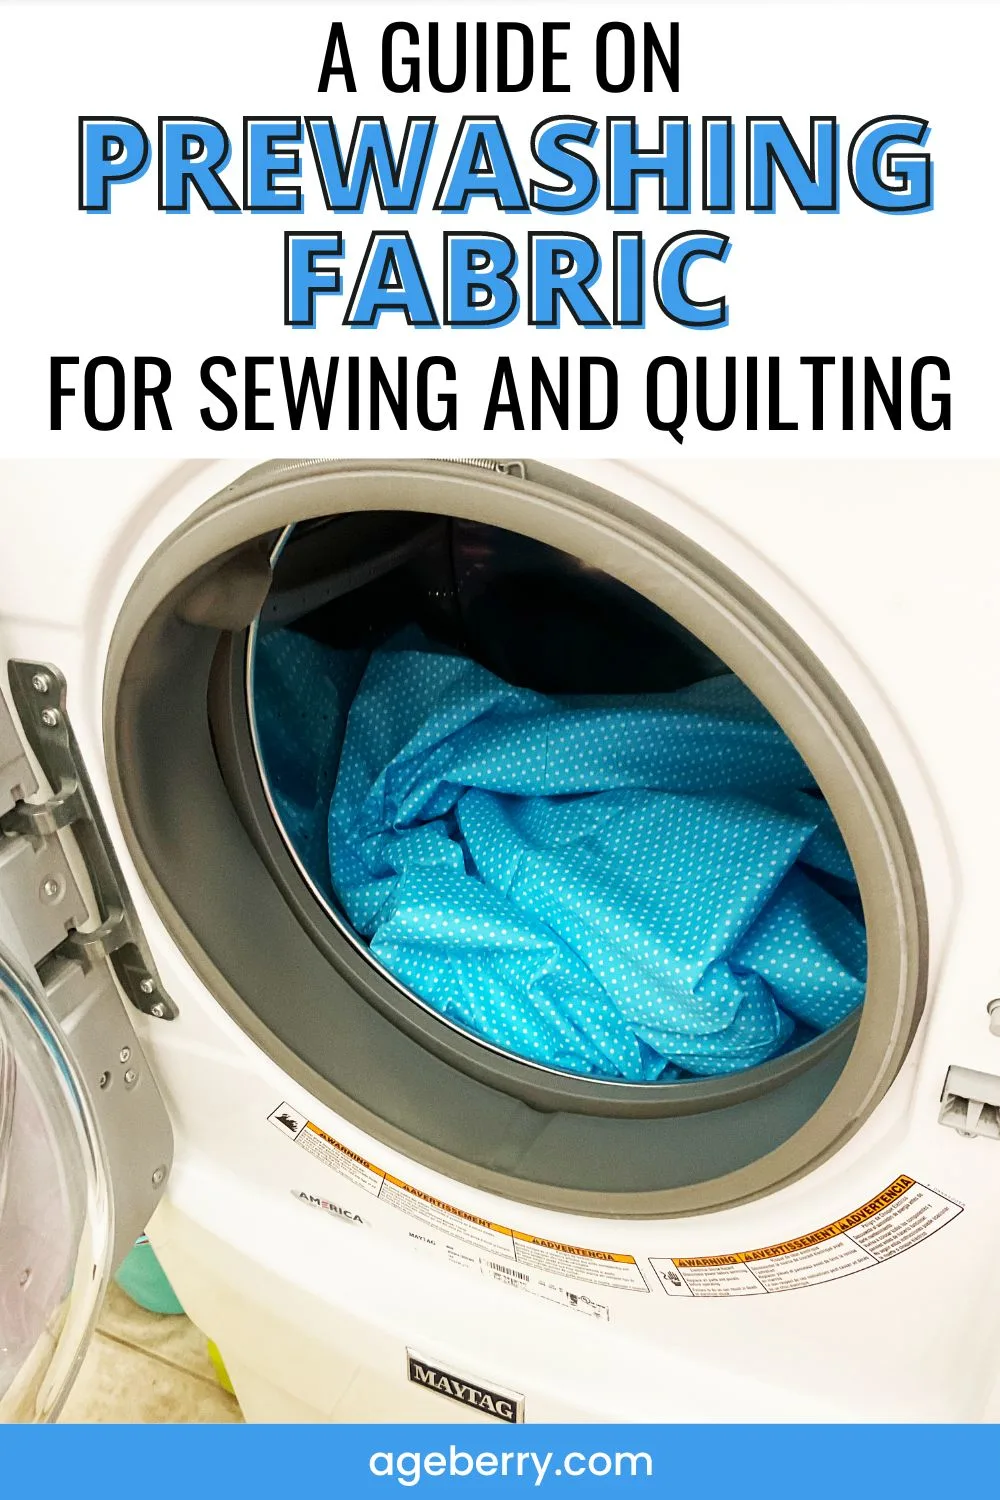 Prewashing Fabric: What Does It Mean And Why Is It A Good Idea?